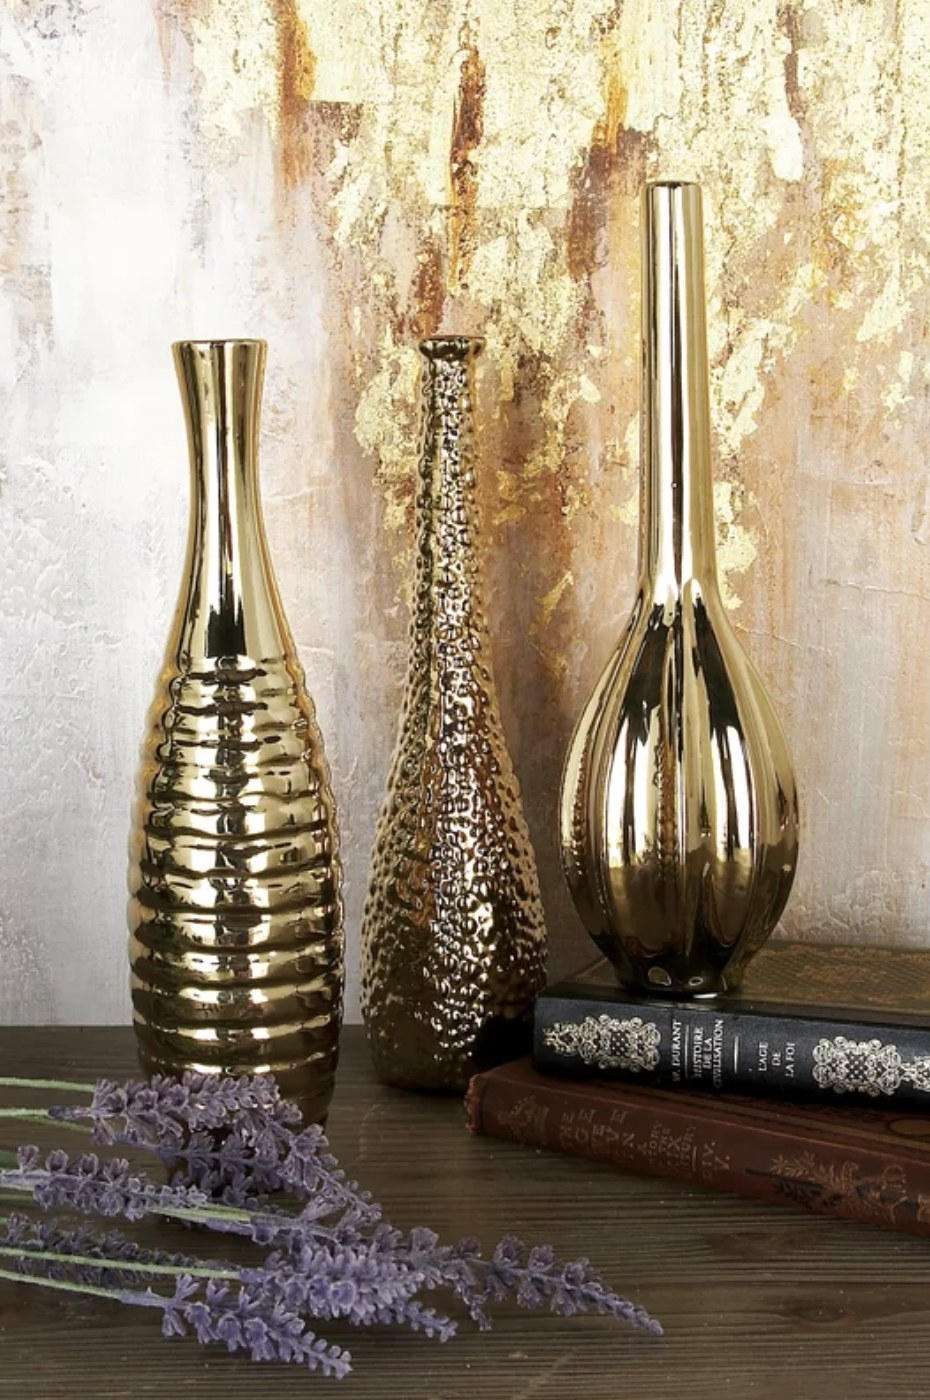 The gold trio of textured vases